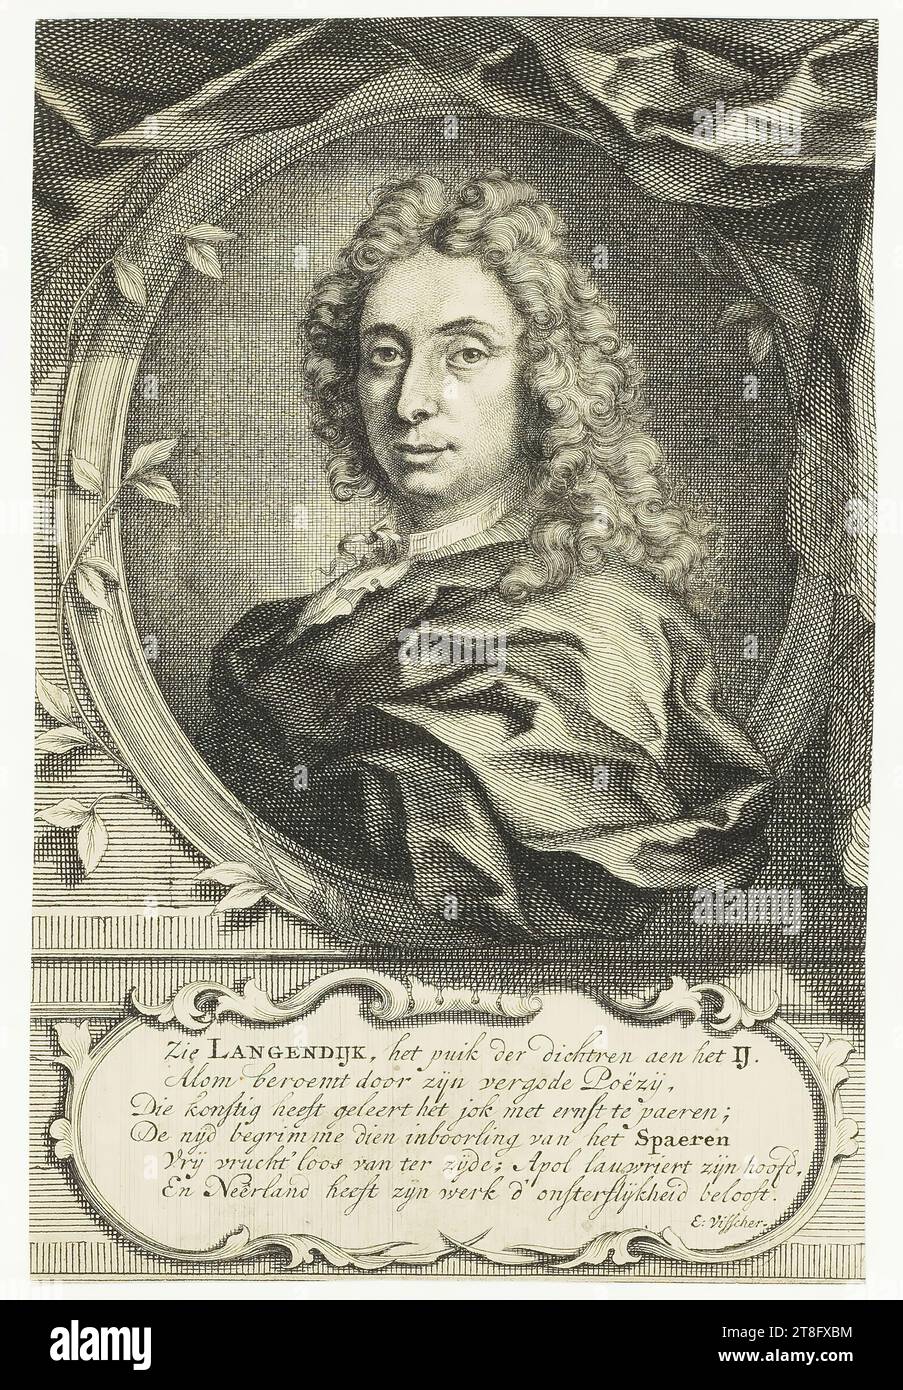 See LANGENDIJK, het puik derdichtren aen het IJ., Famous for his versed Poetry, Who skillfully taught the yoke with seriousness;, The envy begrimme die native of spaeren, quite fruitless of silk; Apol laurels his head, And Neerland has promised his work d'immortality. E. Visscher Stock Photo